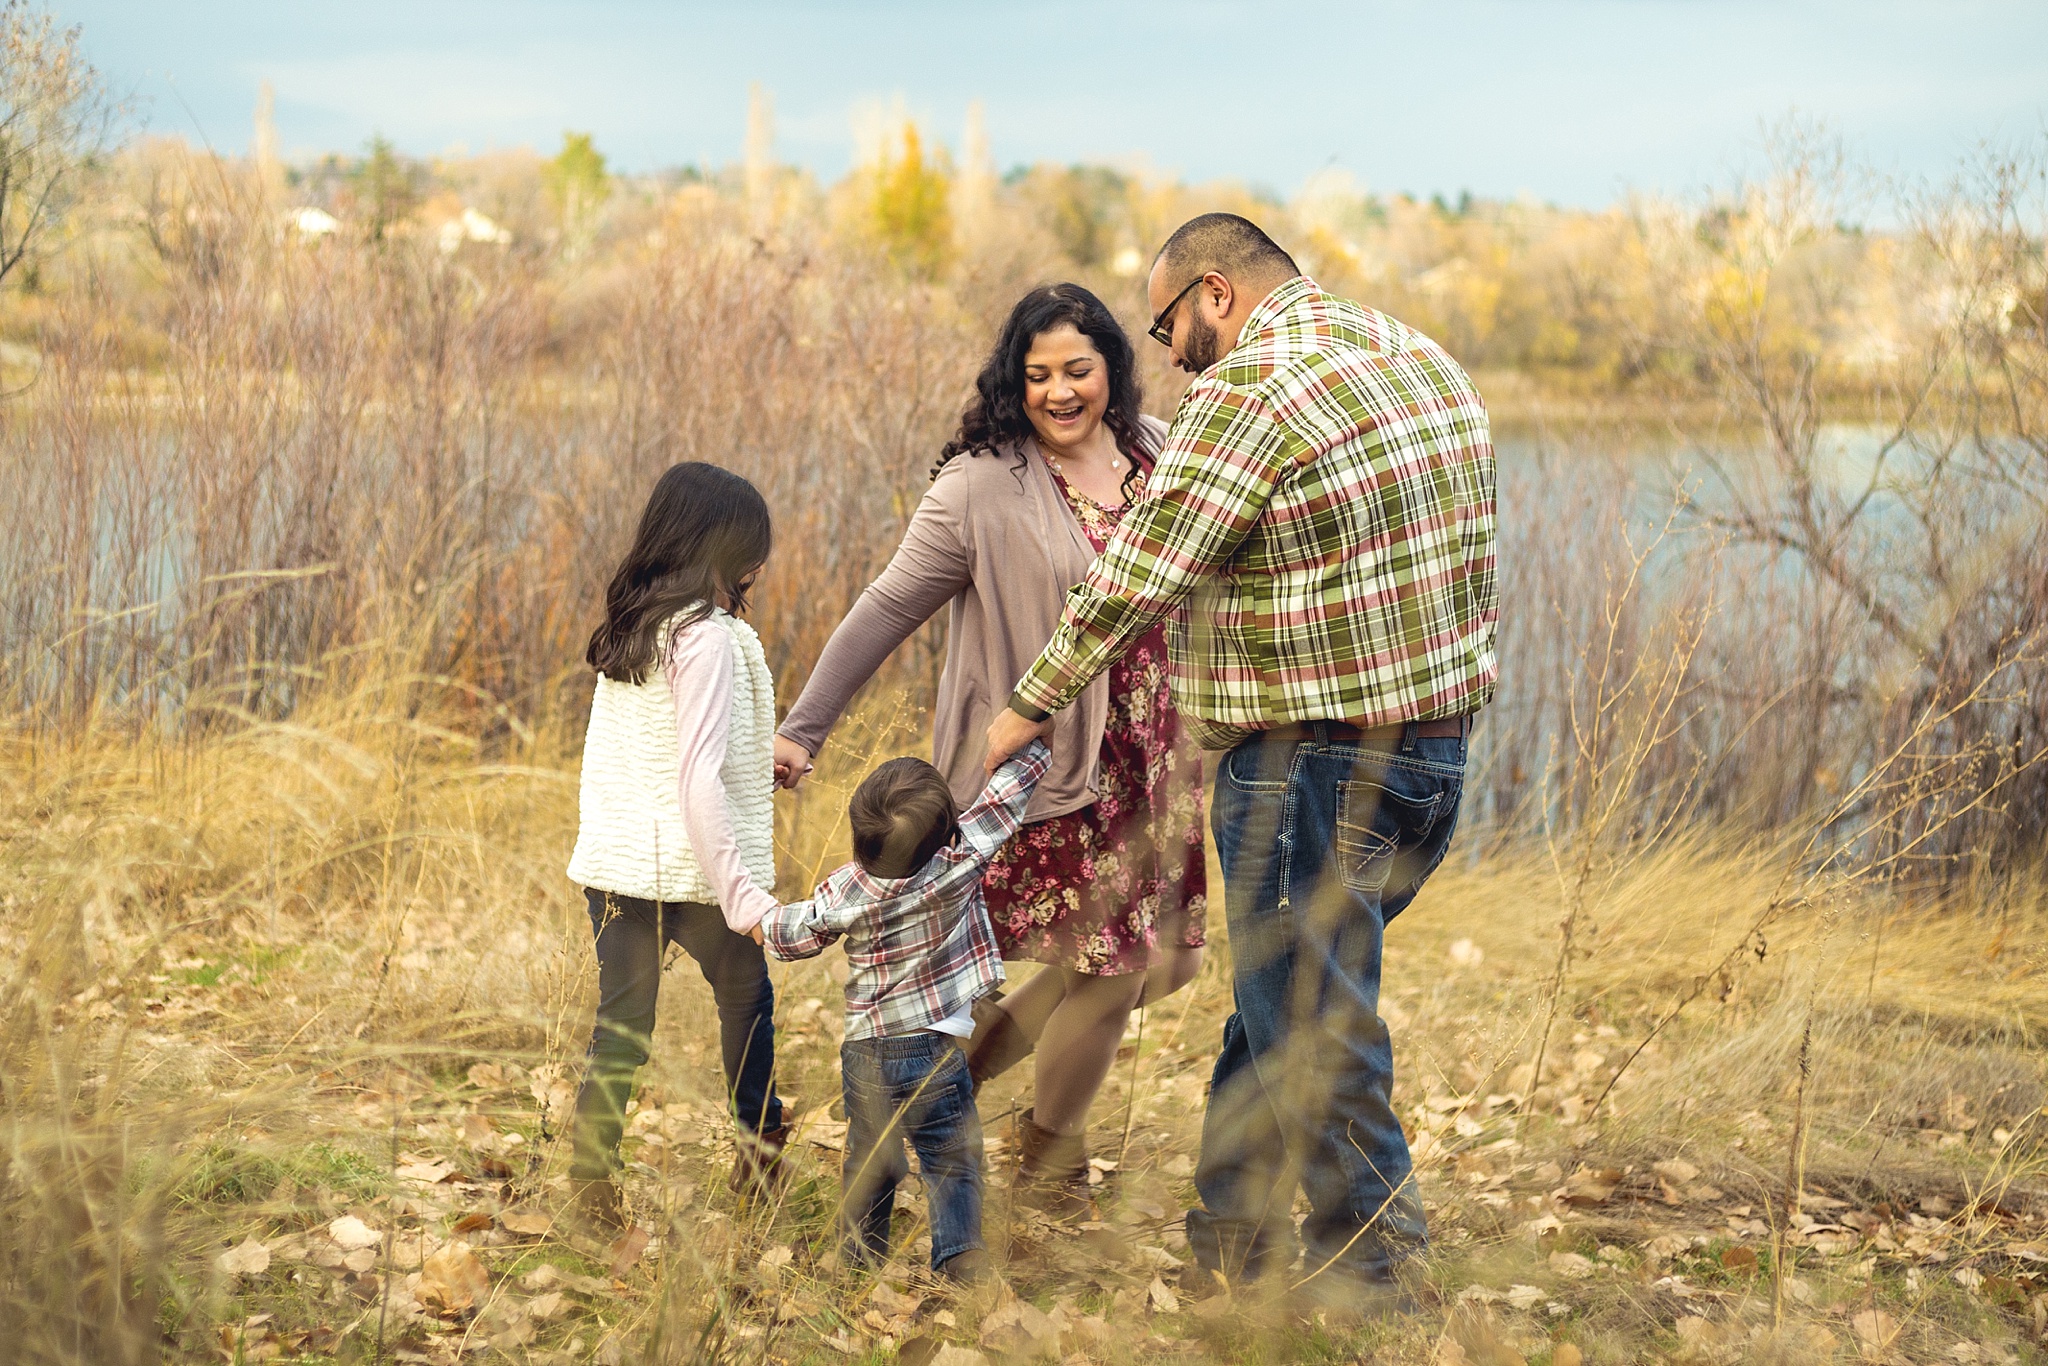 Family playing during fall family portraits. The Aguayo Family’s Fall Family Photo Session at Golden Ponds Nature Area by Colorado Family Photographer, Jennifer Garza. Golden Ponds Nature Area Family Photographer, Golden Ponds Nature Area, Golden Ponds, Golden Ponds Family Photographer, Longmont Family Photography, Longmont Family Photographer, Colorado Family Photos, Colorado Family Photographer, Colorado Fall Photos, Fall Photos